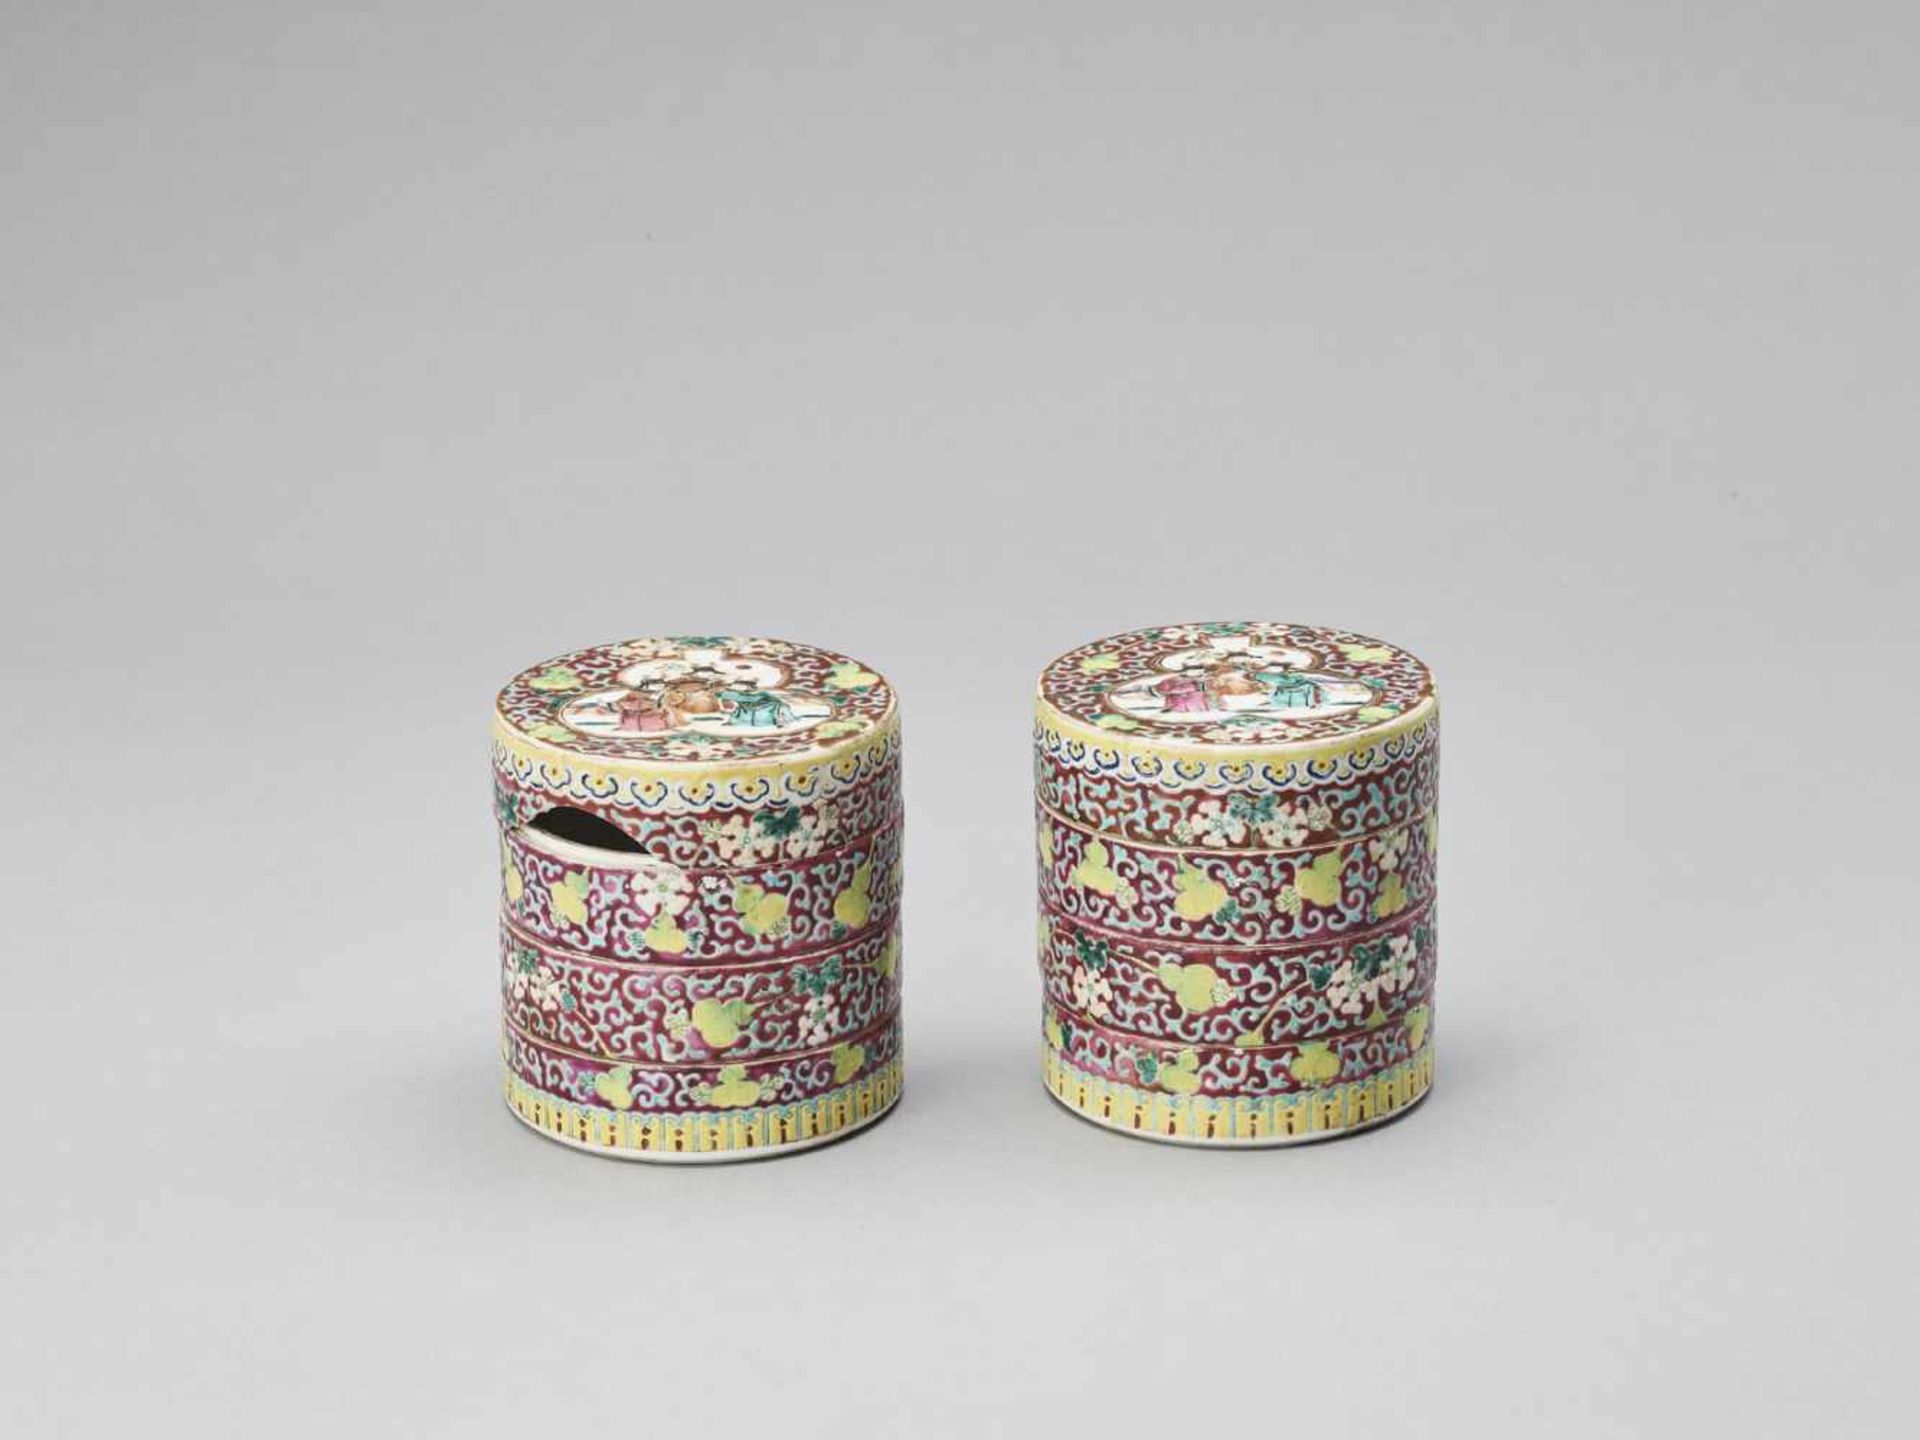 A PAIR OF THREE-TIERED ENAMELED PORCELAIN COSMETIC BOXES, REPUBLIC - Bild 5 aus 9